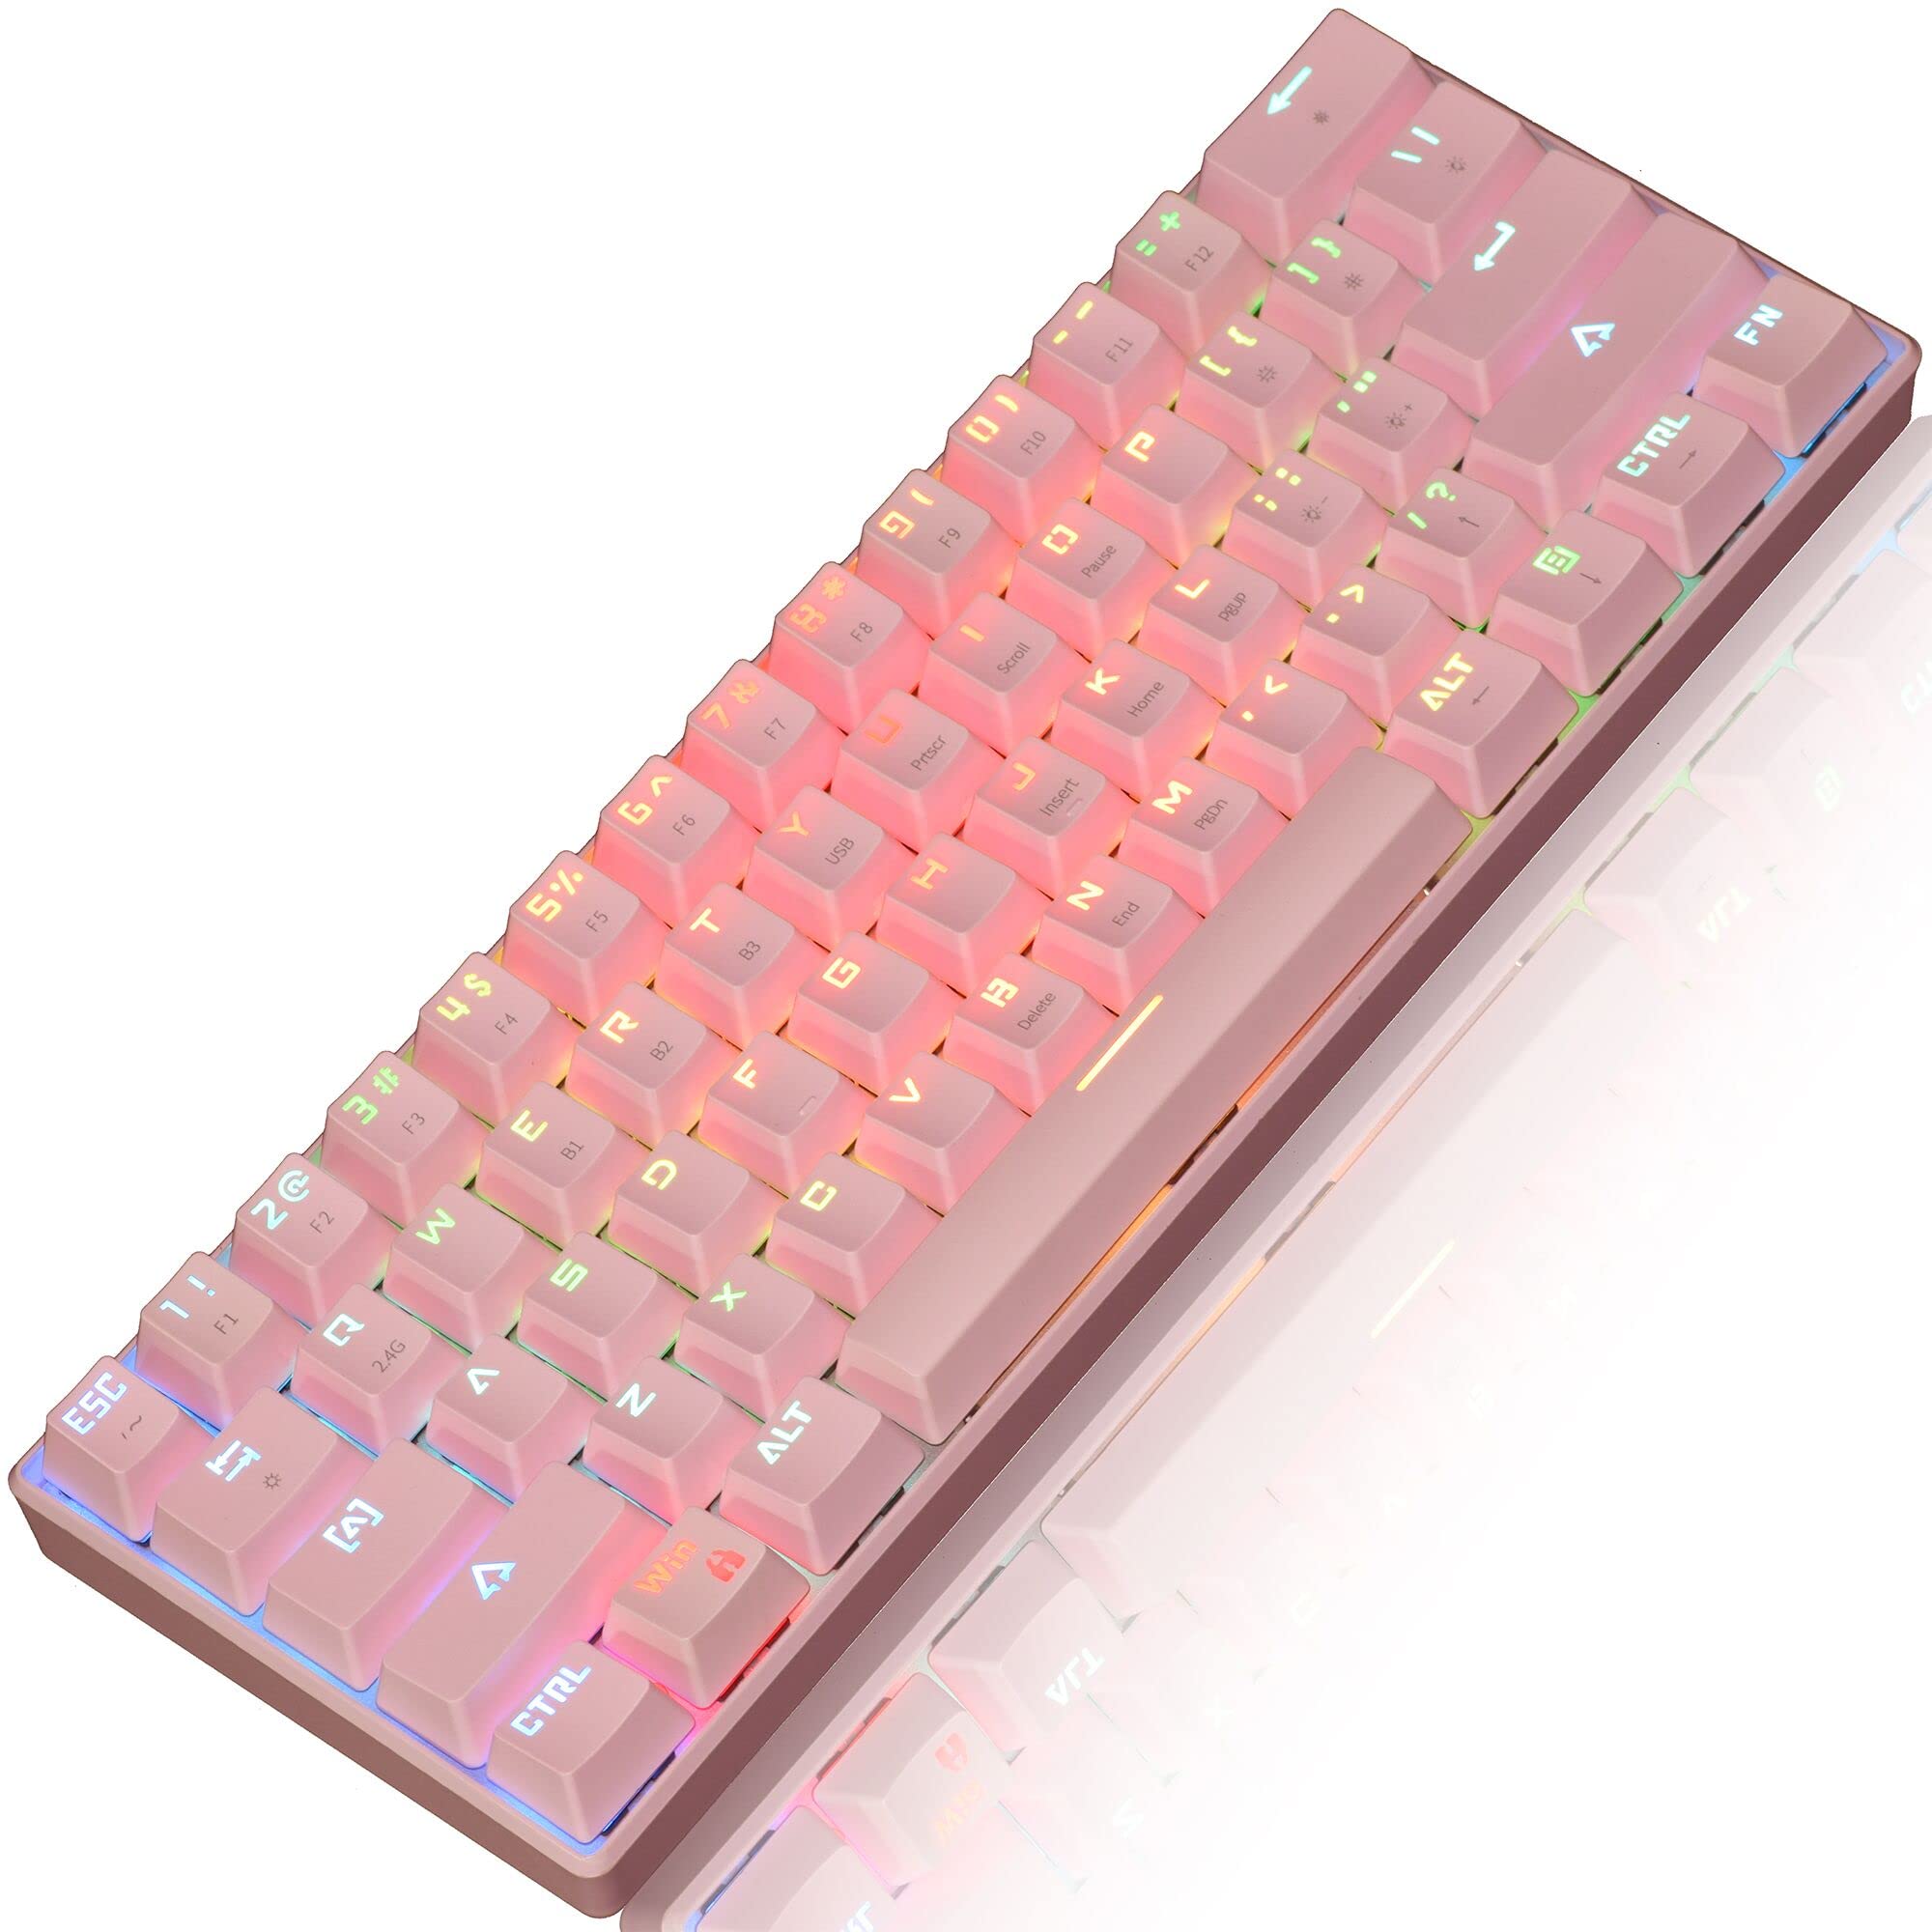 CHICHEN 60% Mechanical Keyboard Three Models Compact with BT5.0/2.4G/USB-C,61 Keys Both Wired/Wireless RGB Backlit Gaming Keyboard,Portable Mini Keyboard for PC/Mac Typist, Travel(Blue Switch,Pink)